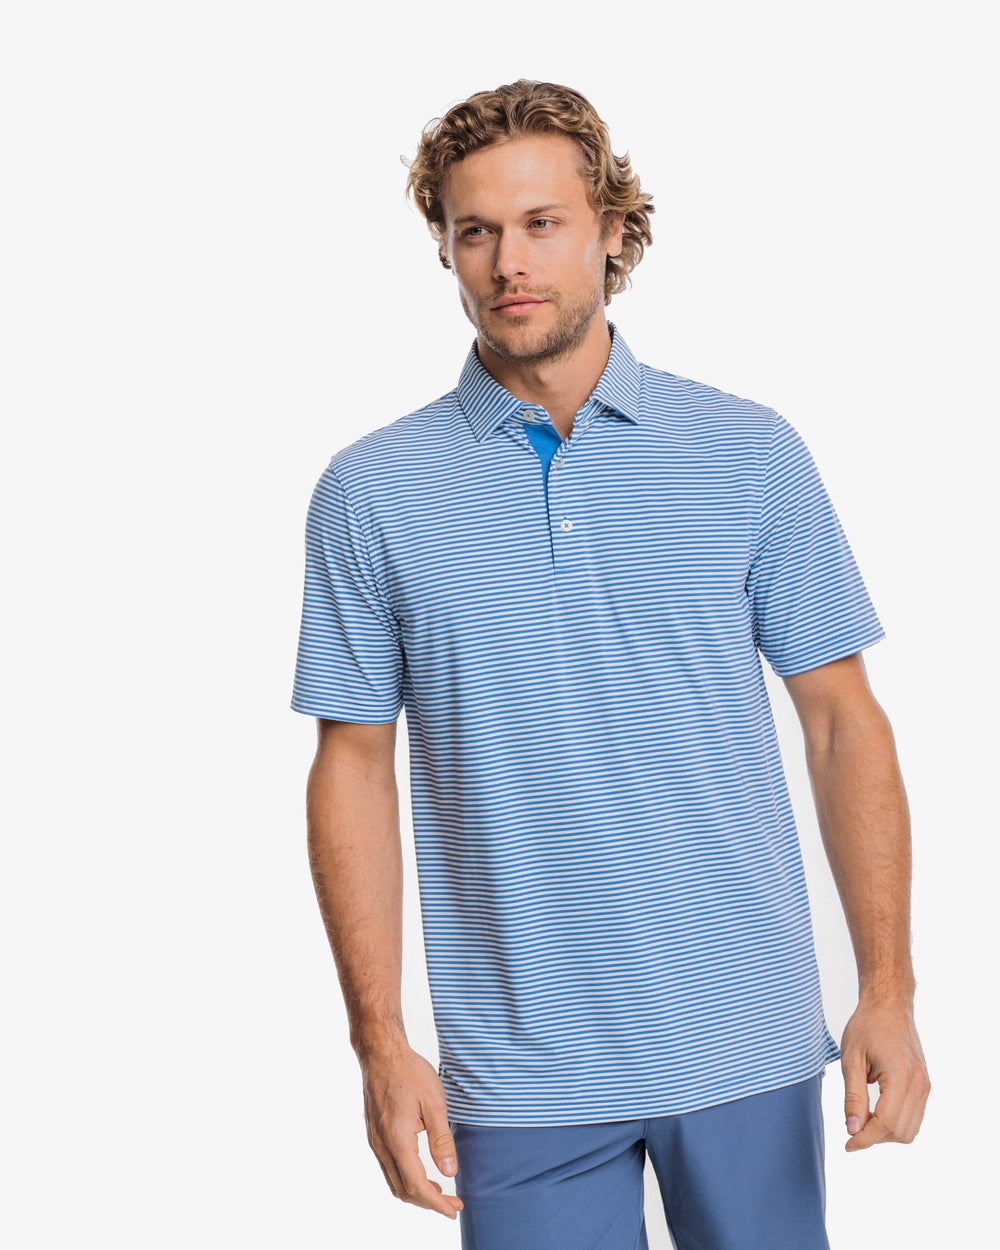 The front view of the Southern Tide Shores Stripe brrr eeze Performance Polo Shirt by Southern Tide - Cloud White